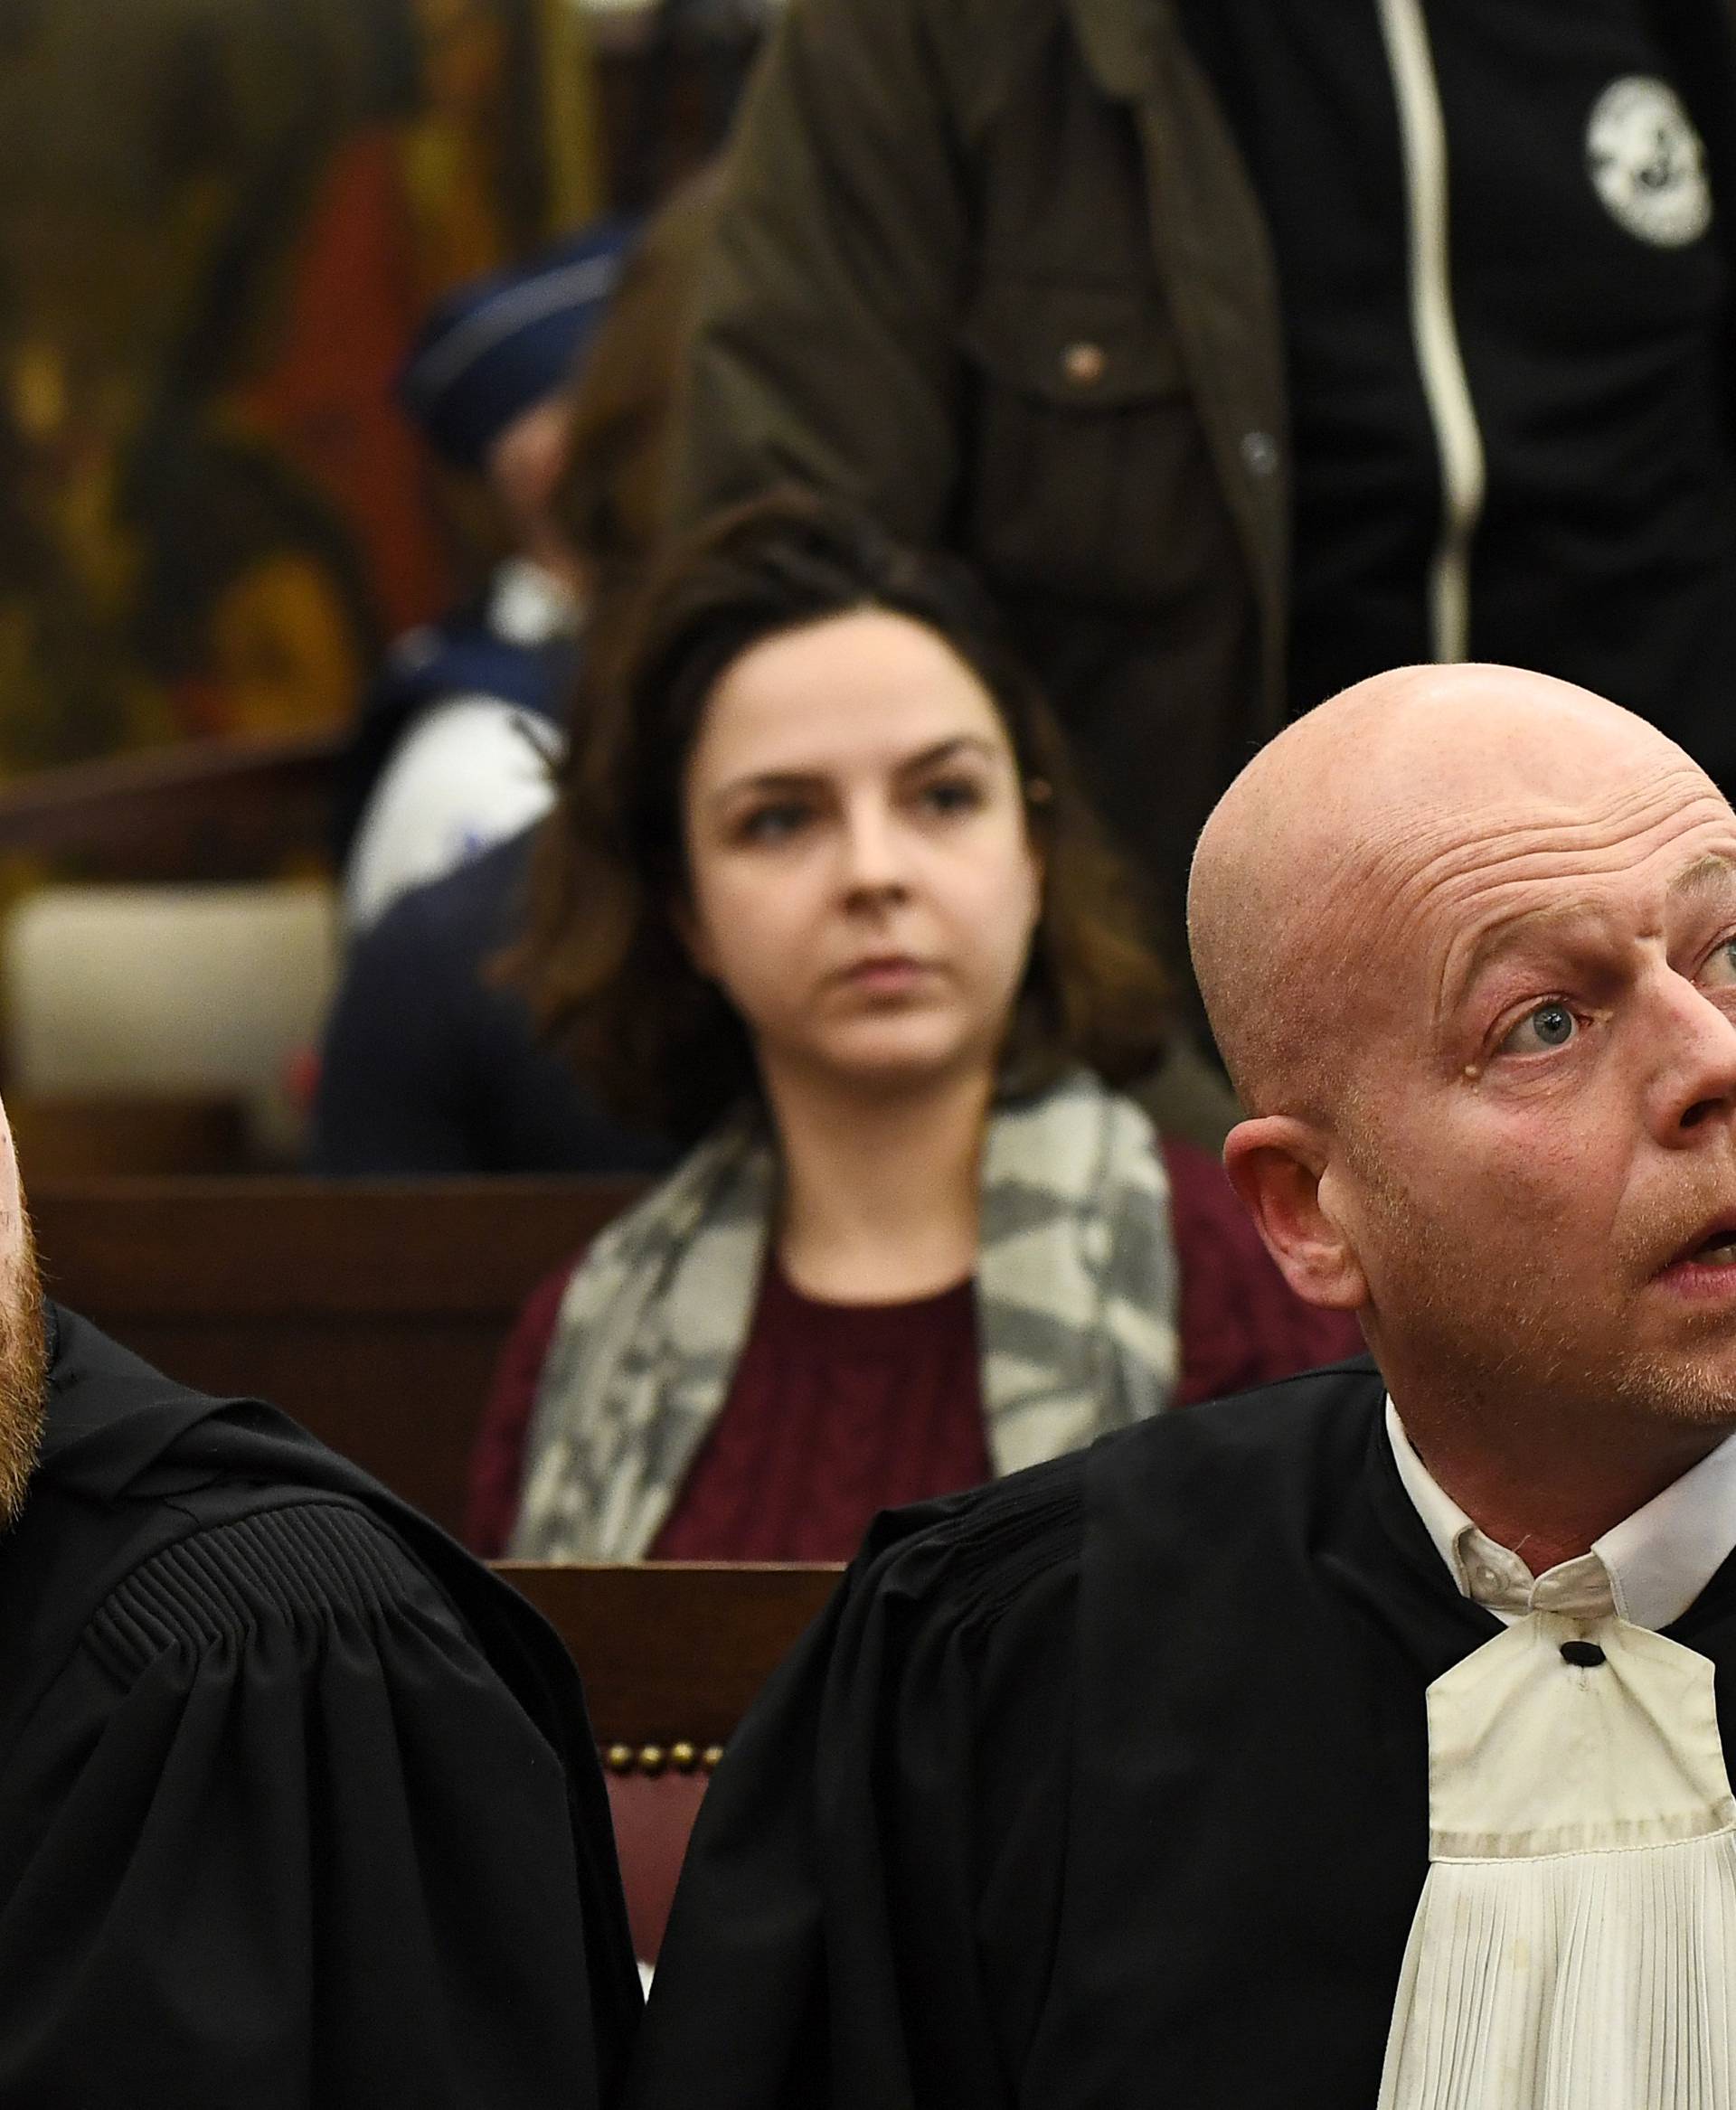 Belgian lawyers representing Paris attacks suspect Salah Abdeslam Mary and Delcoigne look on in the courtroom prior to the opening of the trial of Salah Abdeslam in Brussels